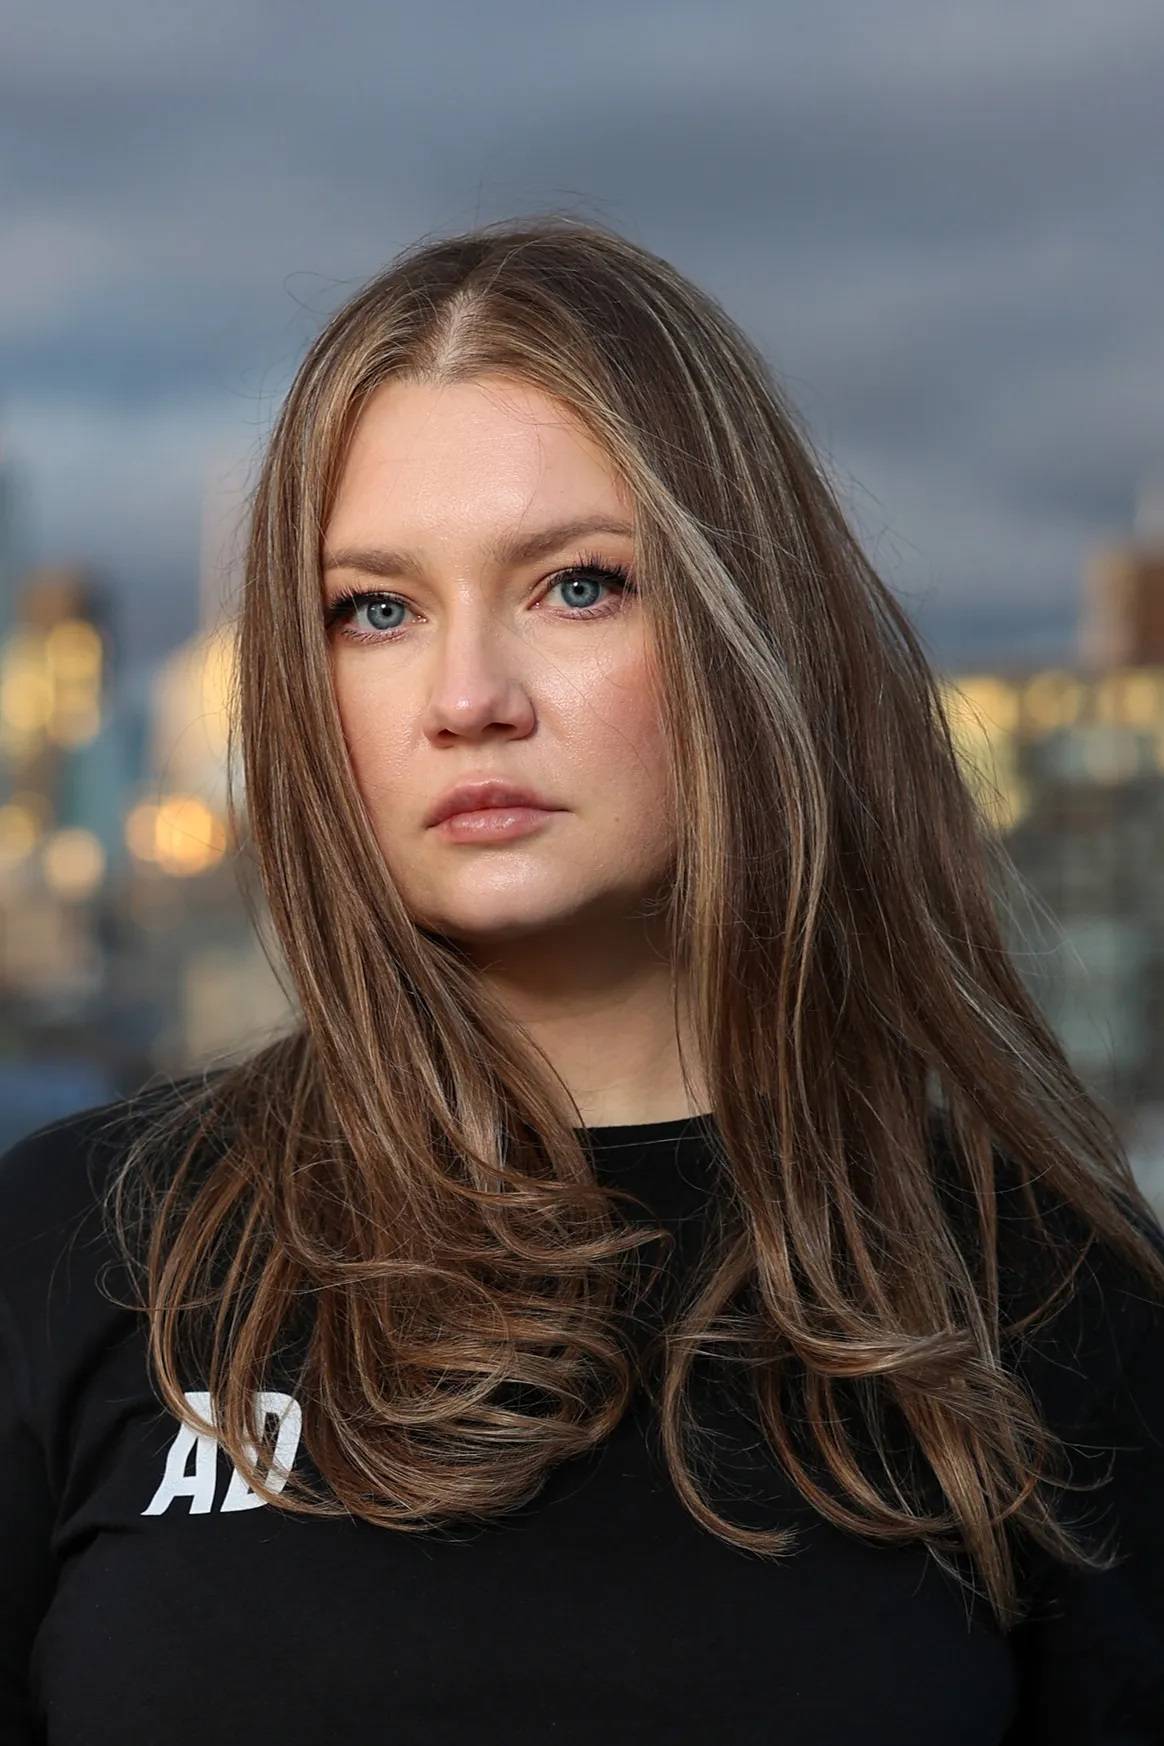 Anna Delvey / Getty Images